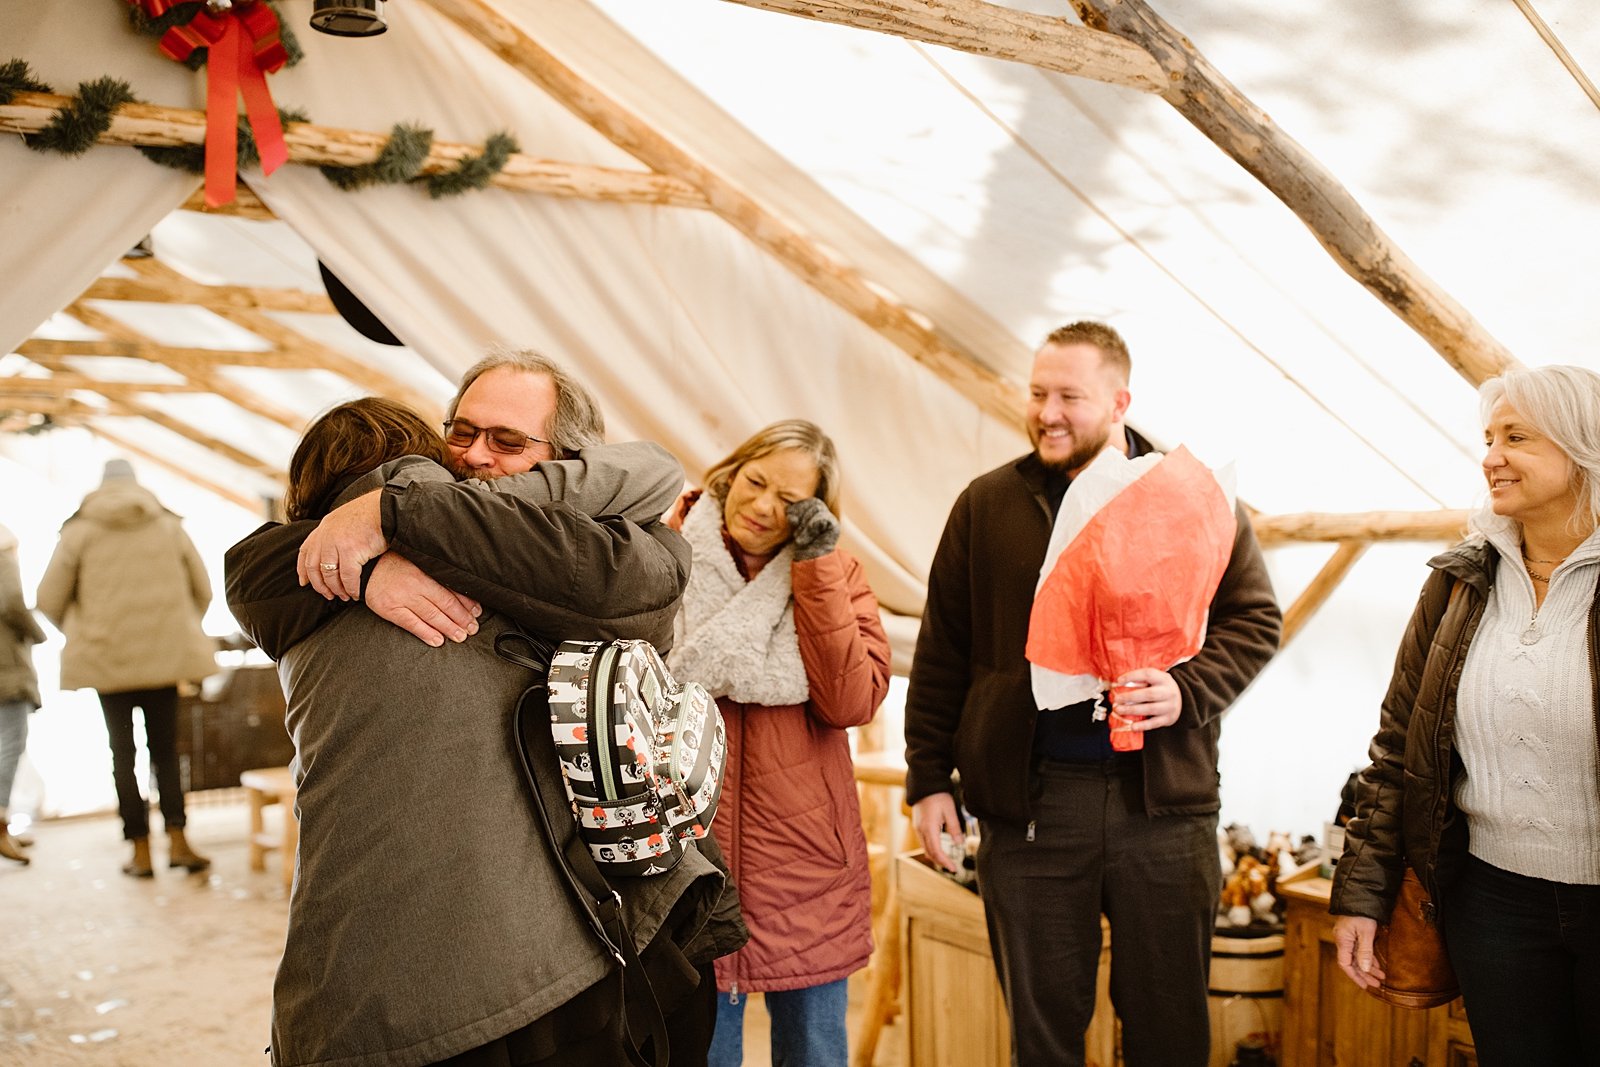 family celebrating couples proposal, proposal celebration,  canvas tent engagement, canvas snow tent, winter canvas tent, wintery engagement celebration, canvas tent with wood burning stove